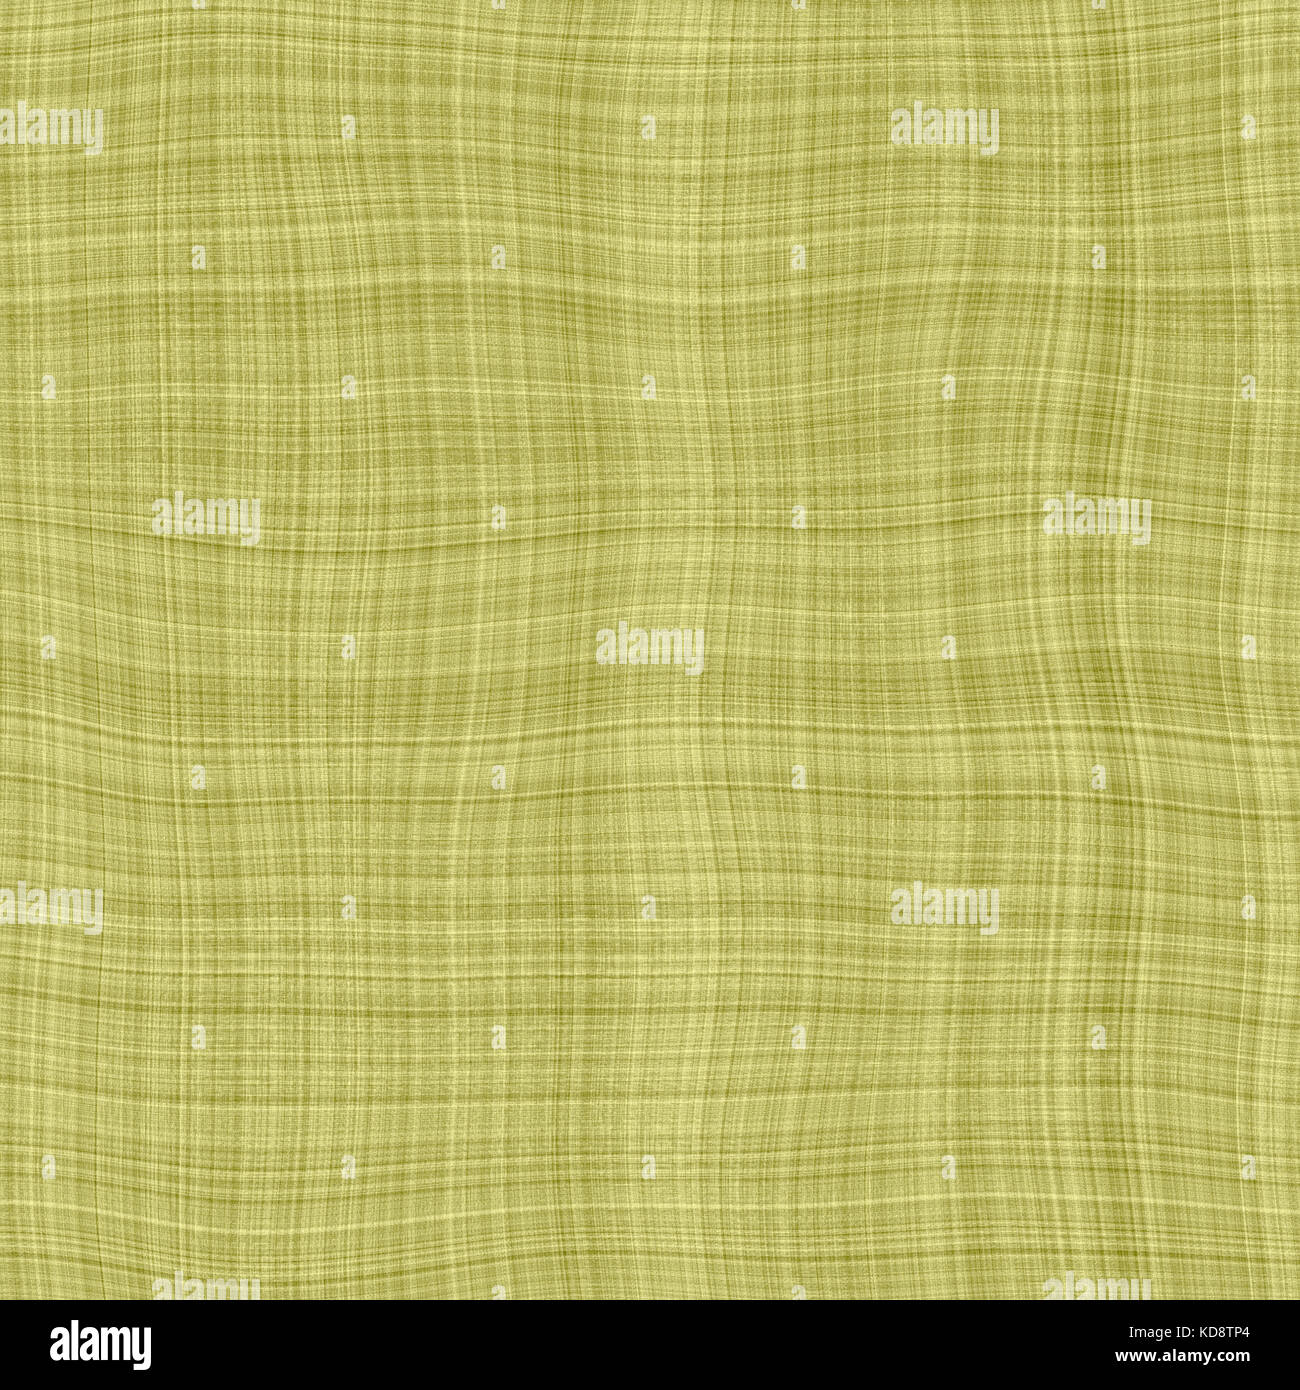 Cloth texture for background Stock Photo